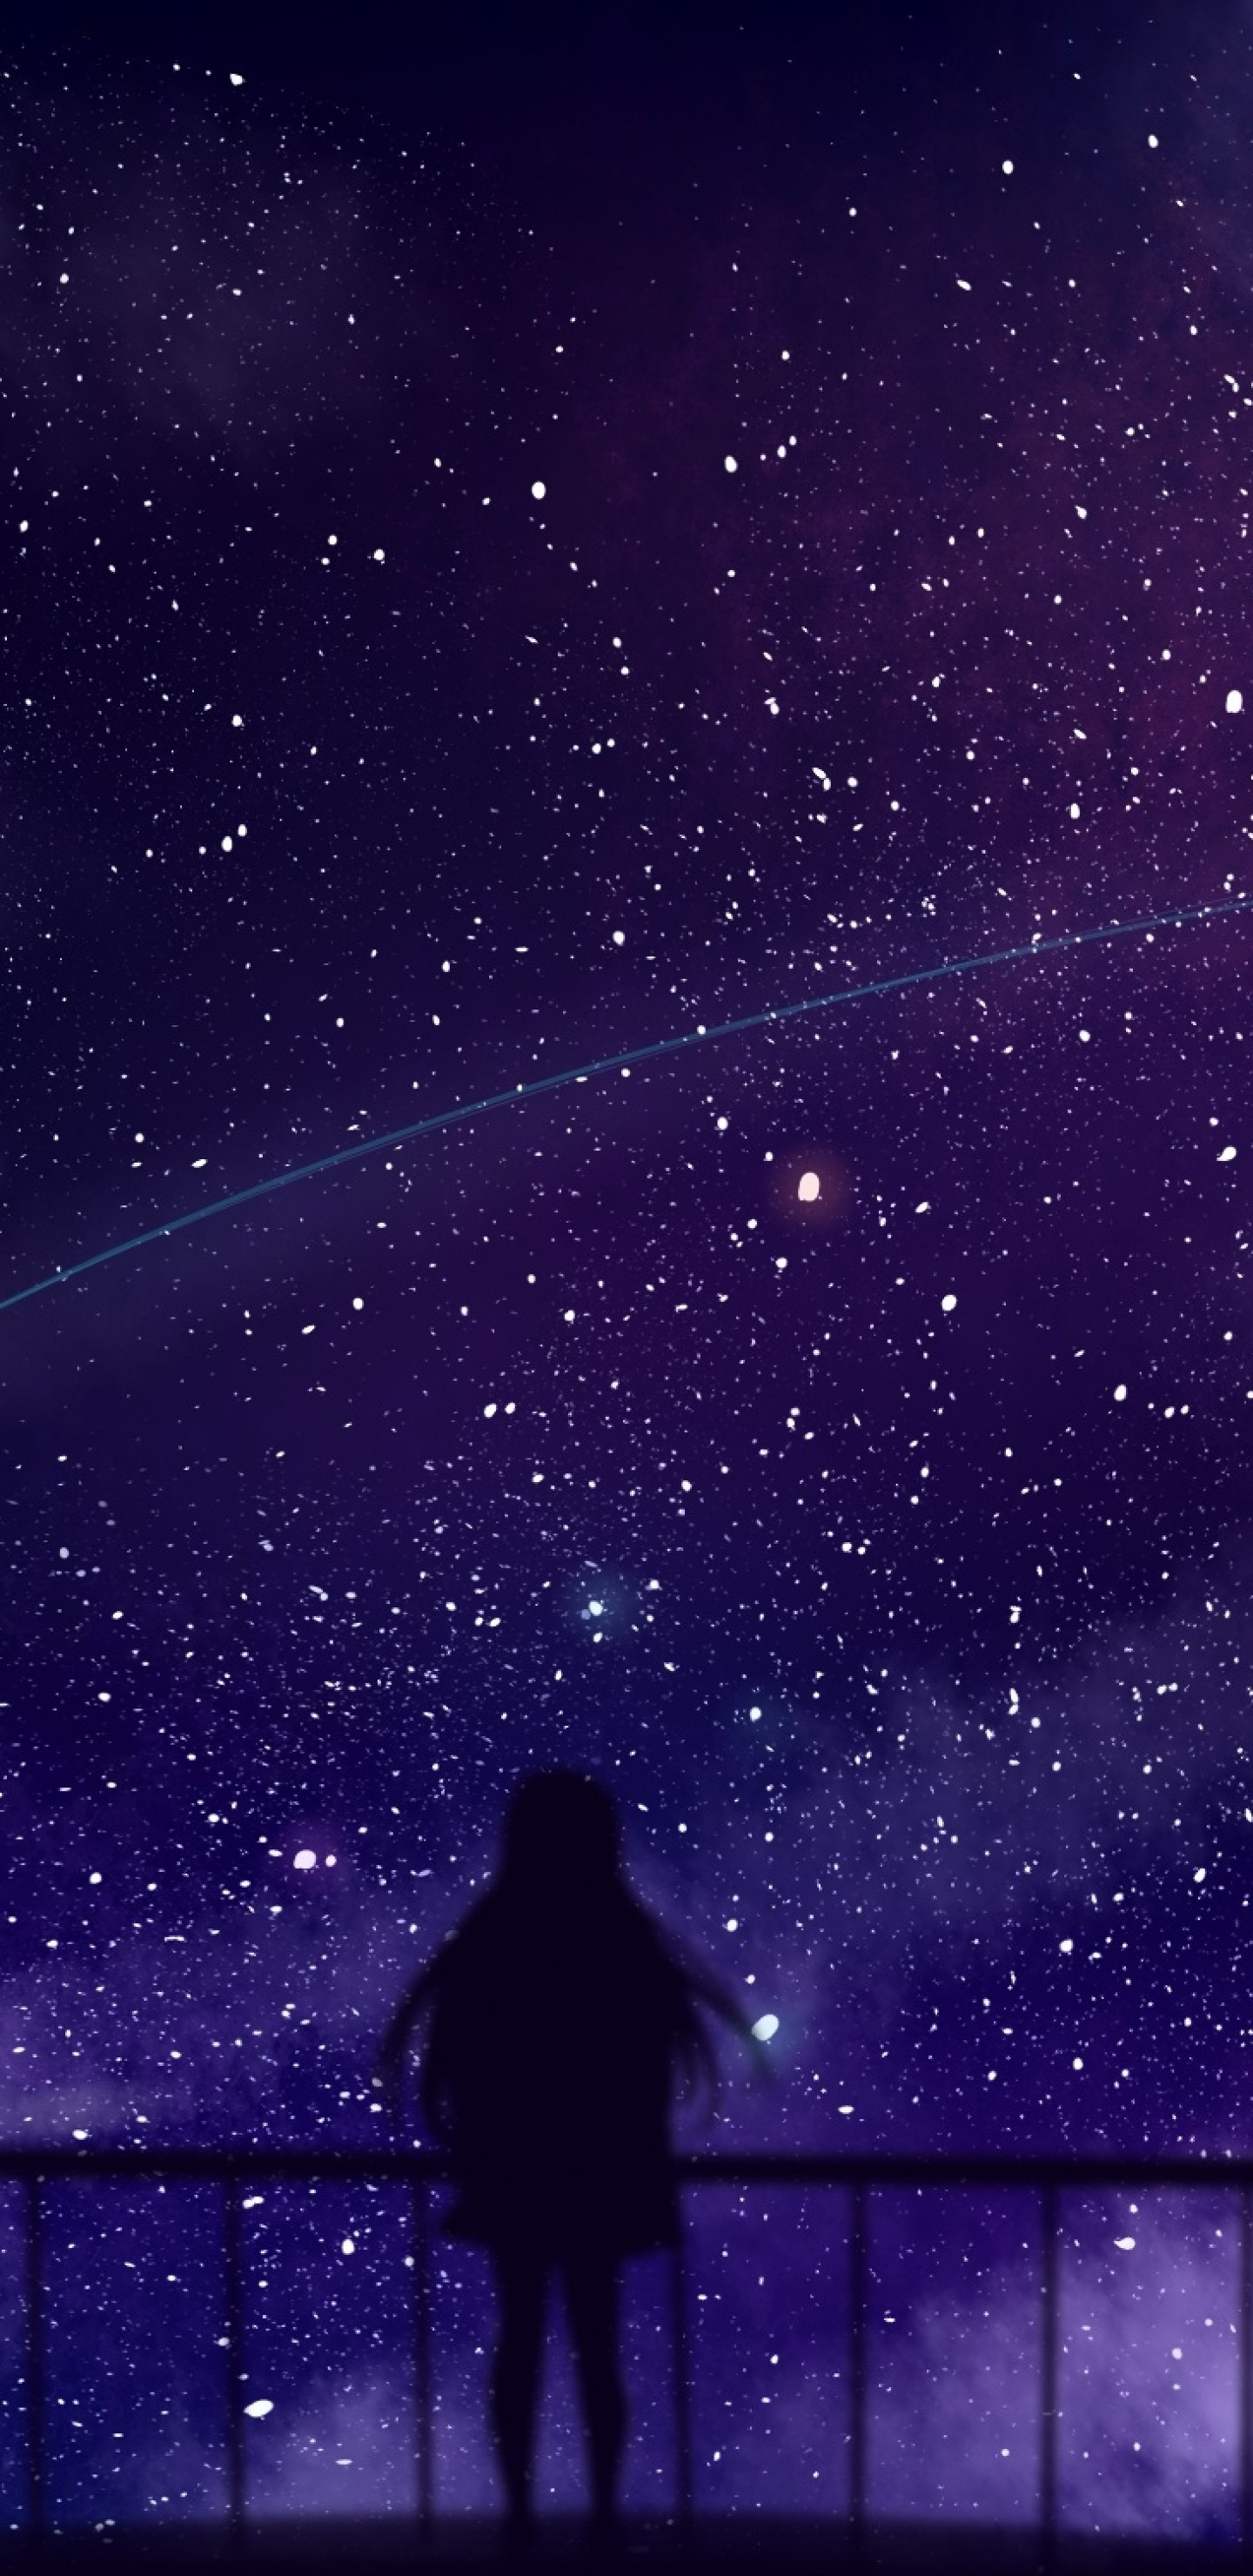 Download 1440x2960 Anime Girl, Silhouette, Stars, Falling Star, Clouds Wallpaper for Samsung Galaxy S Note S S8+, Google Pixel 3 XL